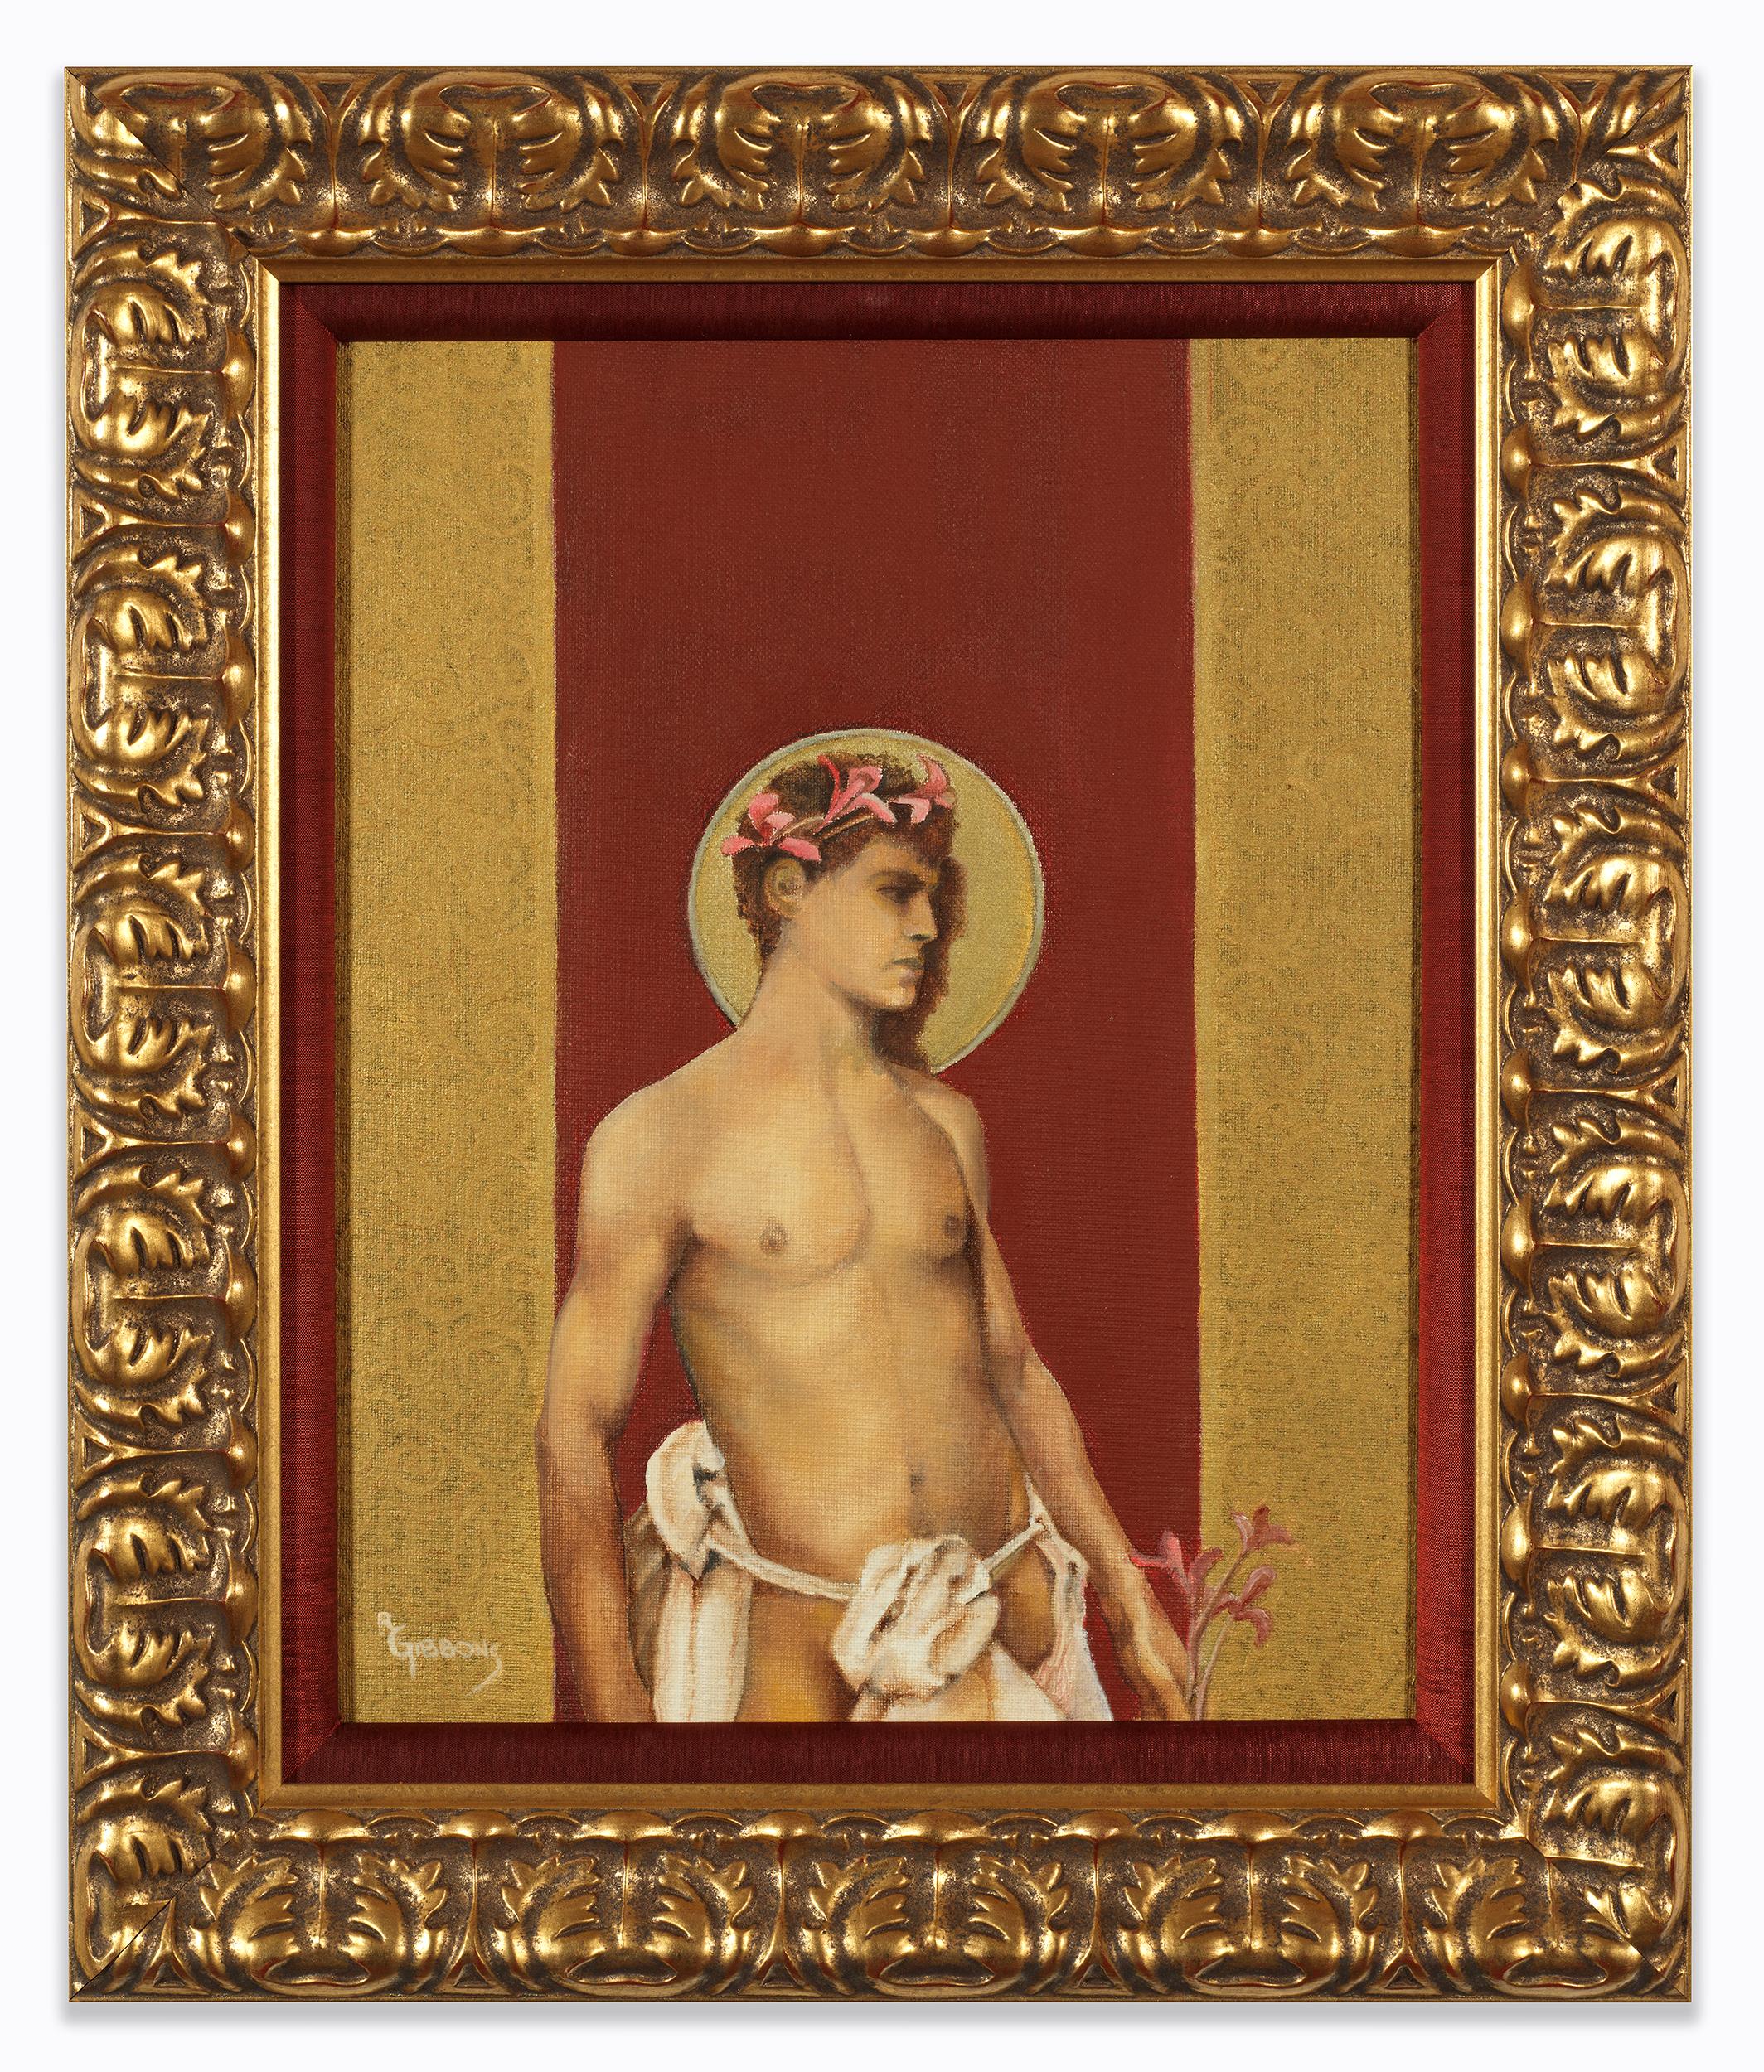 Saint II - Nude Male Torso Painting on Red and Gold by Richard Gibbons 1